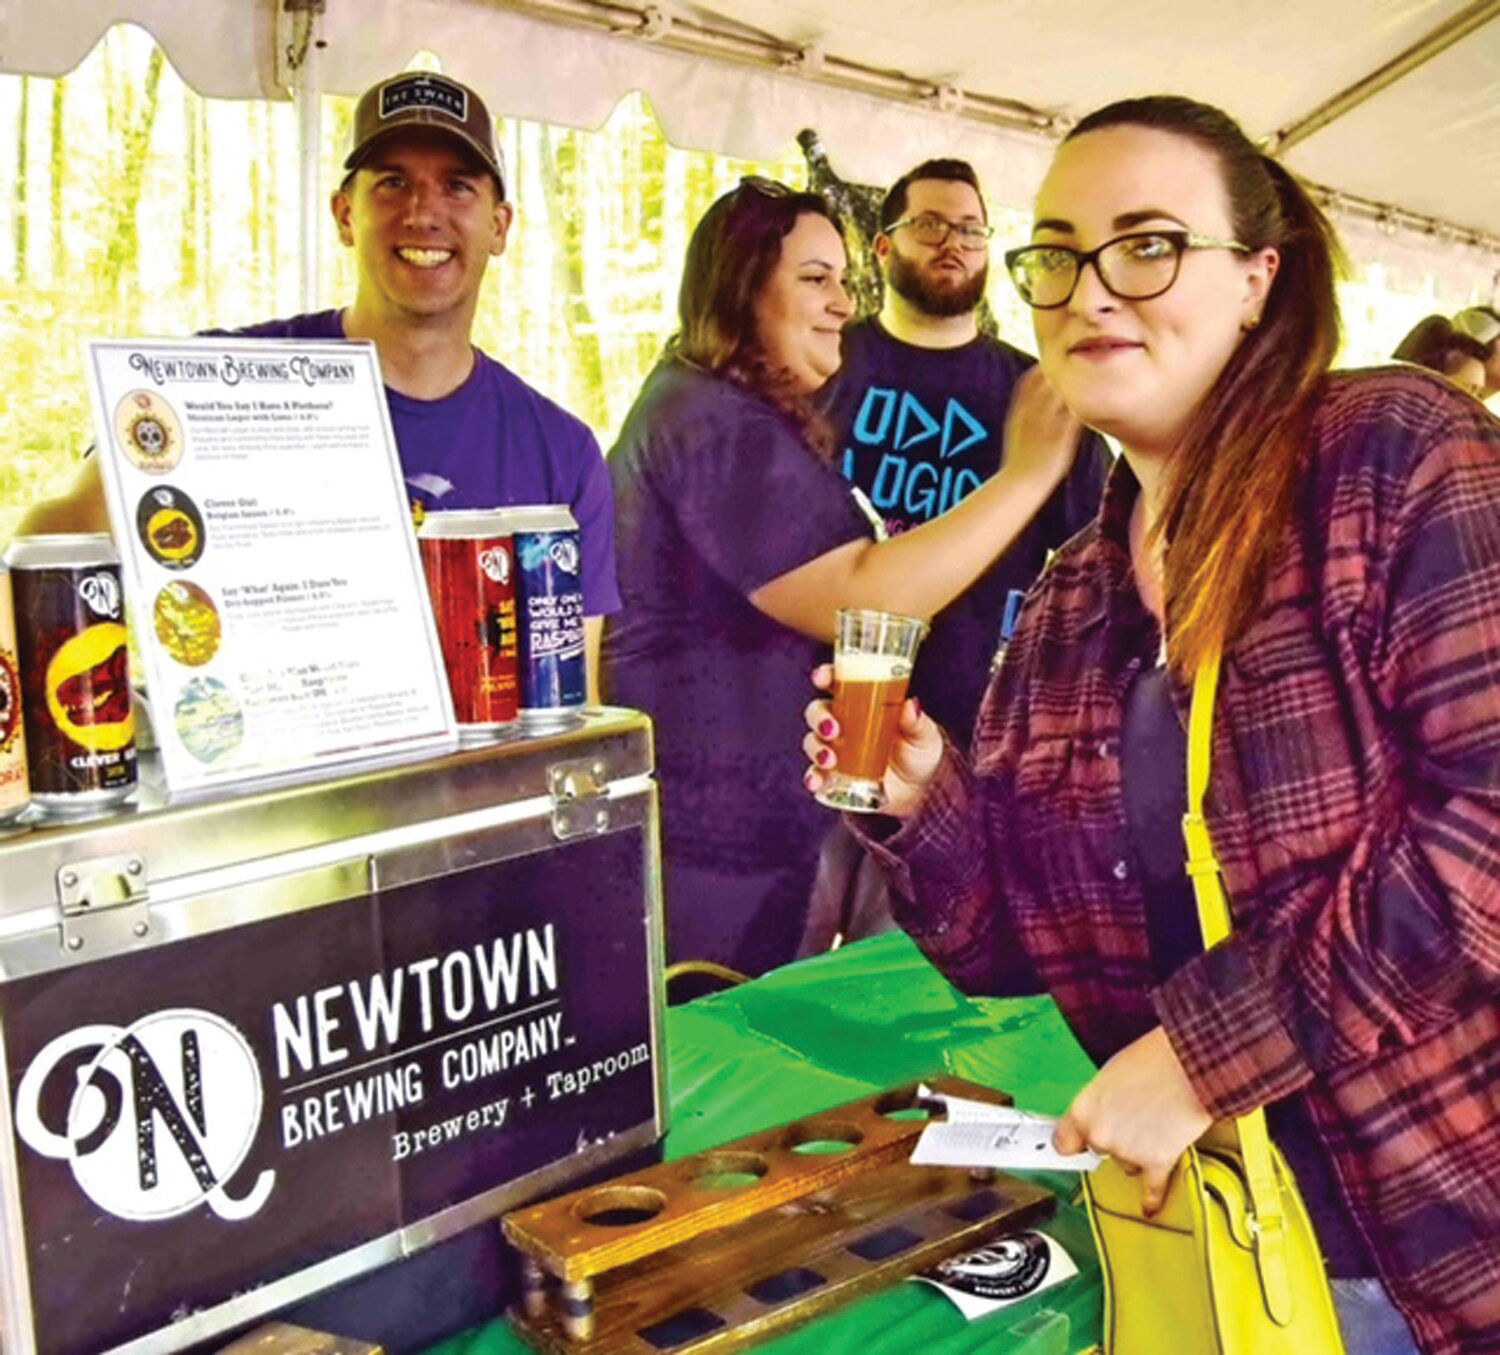 Sinead Rementer is served at the Newtown Brewing Company station by Gregg Bonstein.